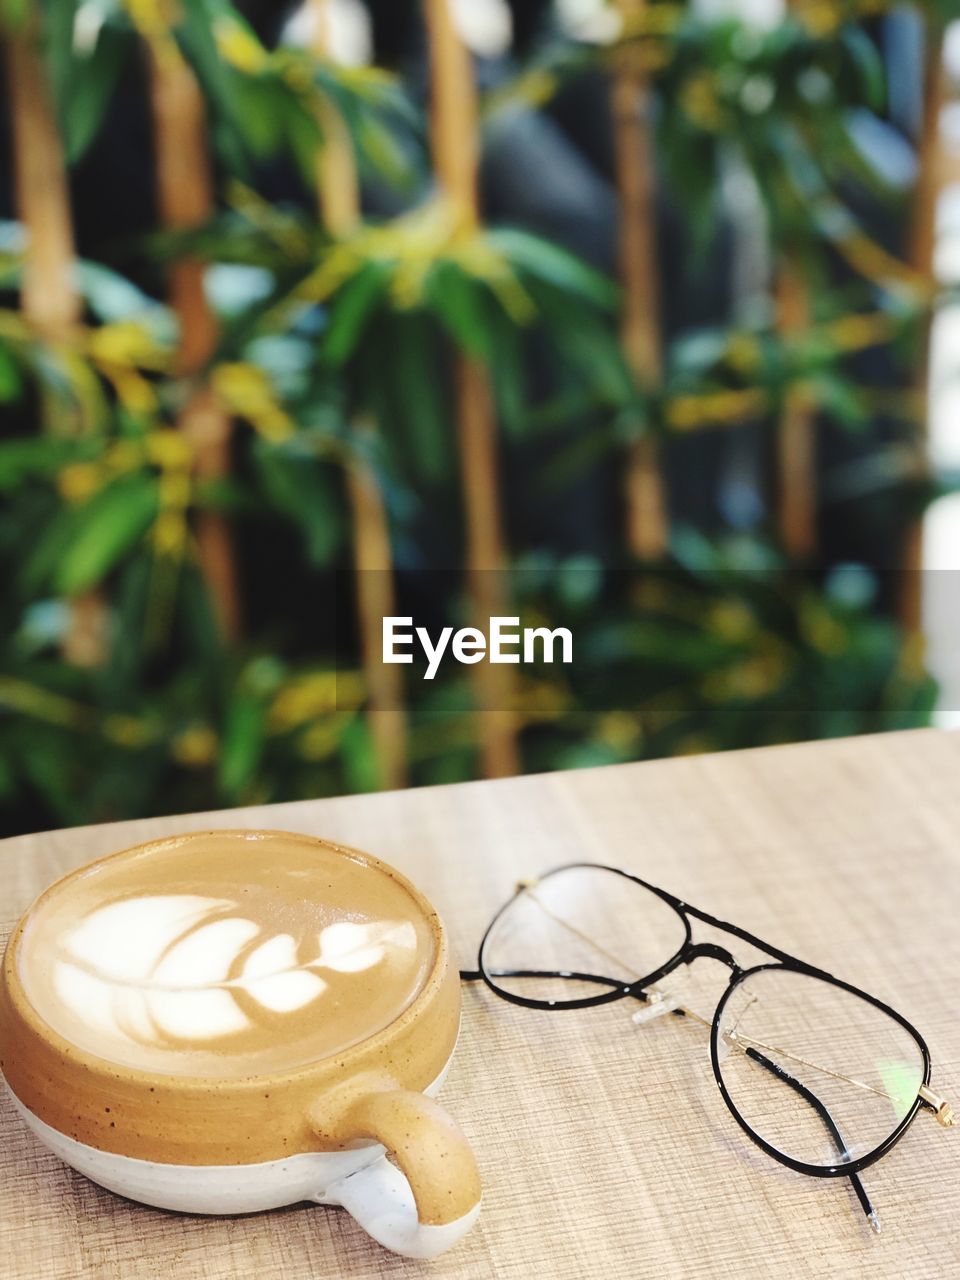 Close-up of coffee with eyeglasses on table